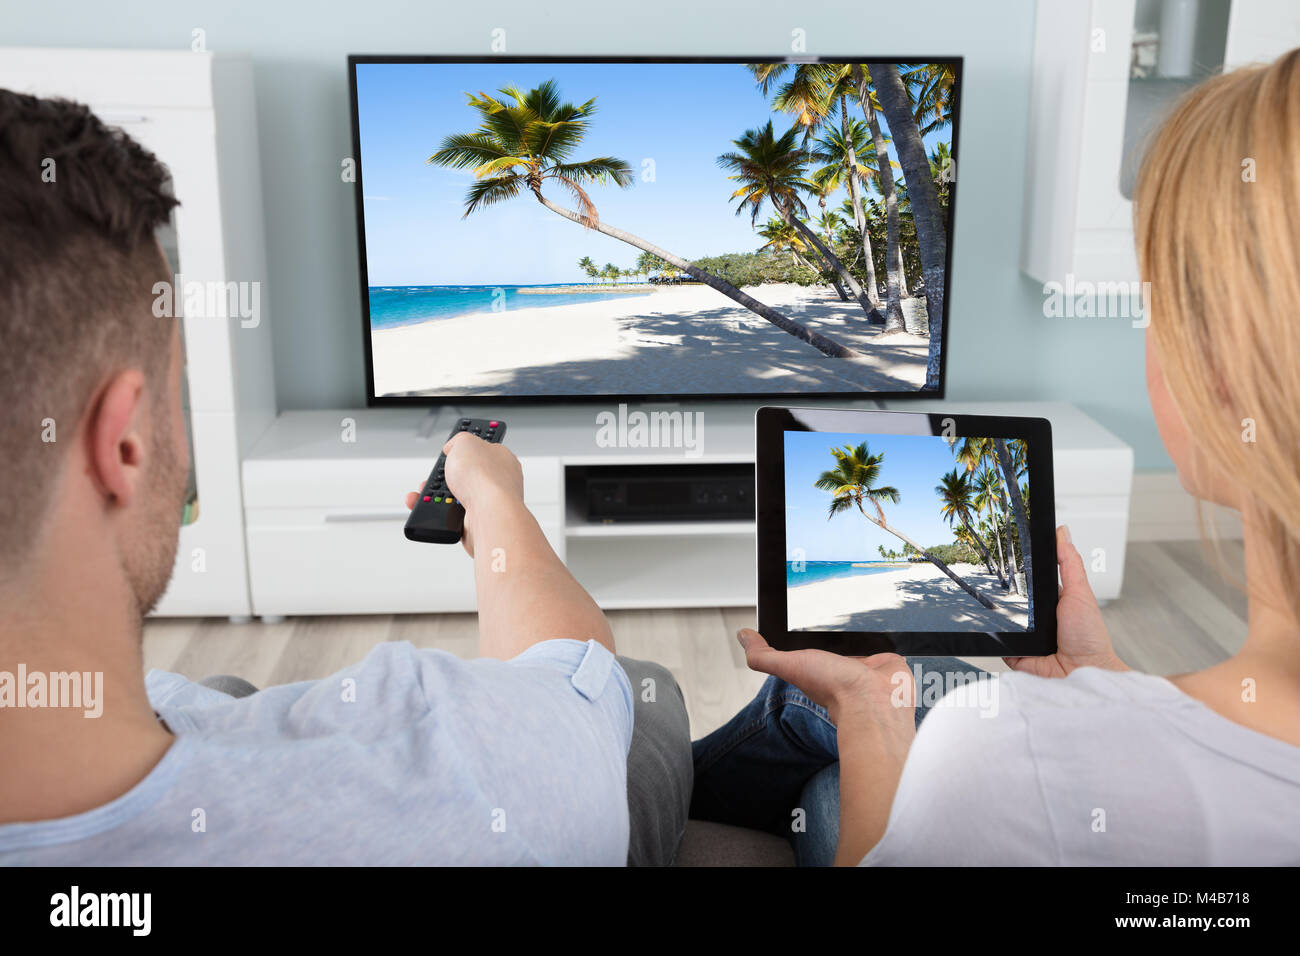 Rear View Of Couple Connecting Television Channel Through WiFi On Digital Tablet At Home Stock Photo